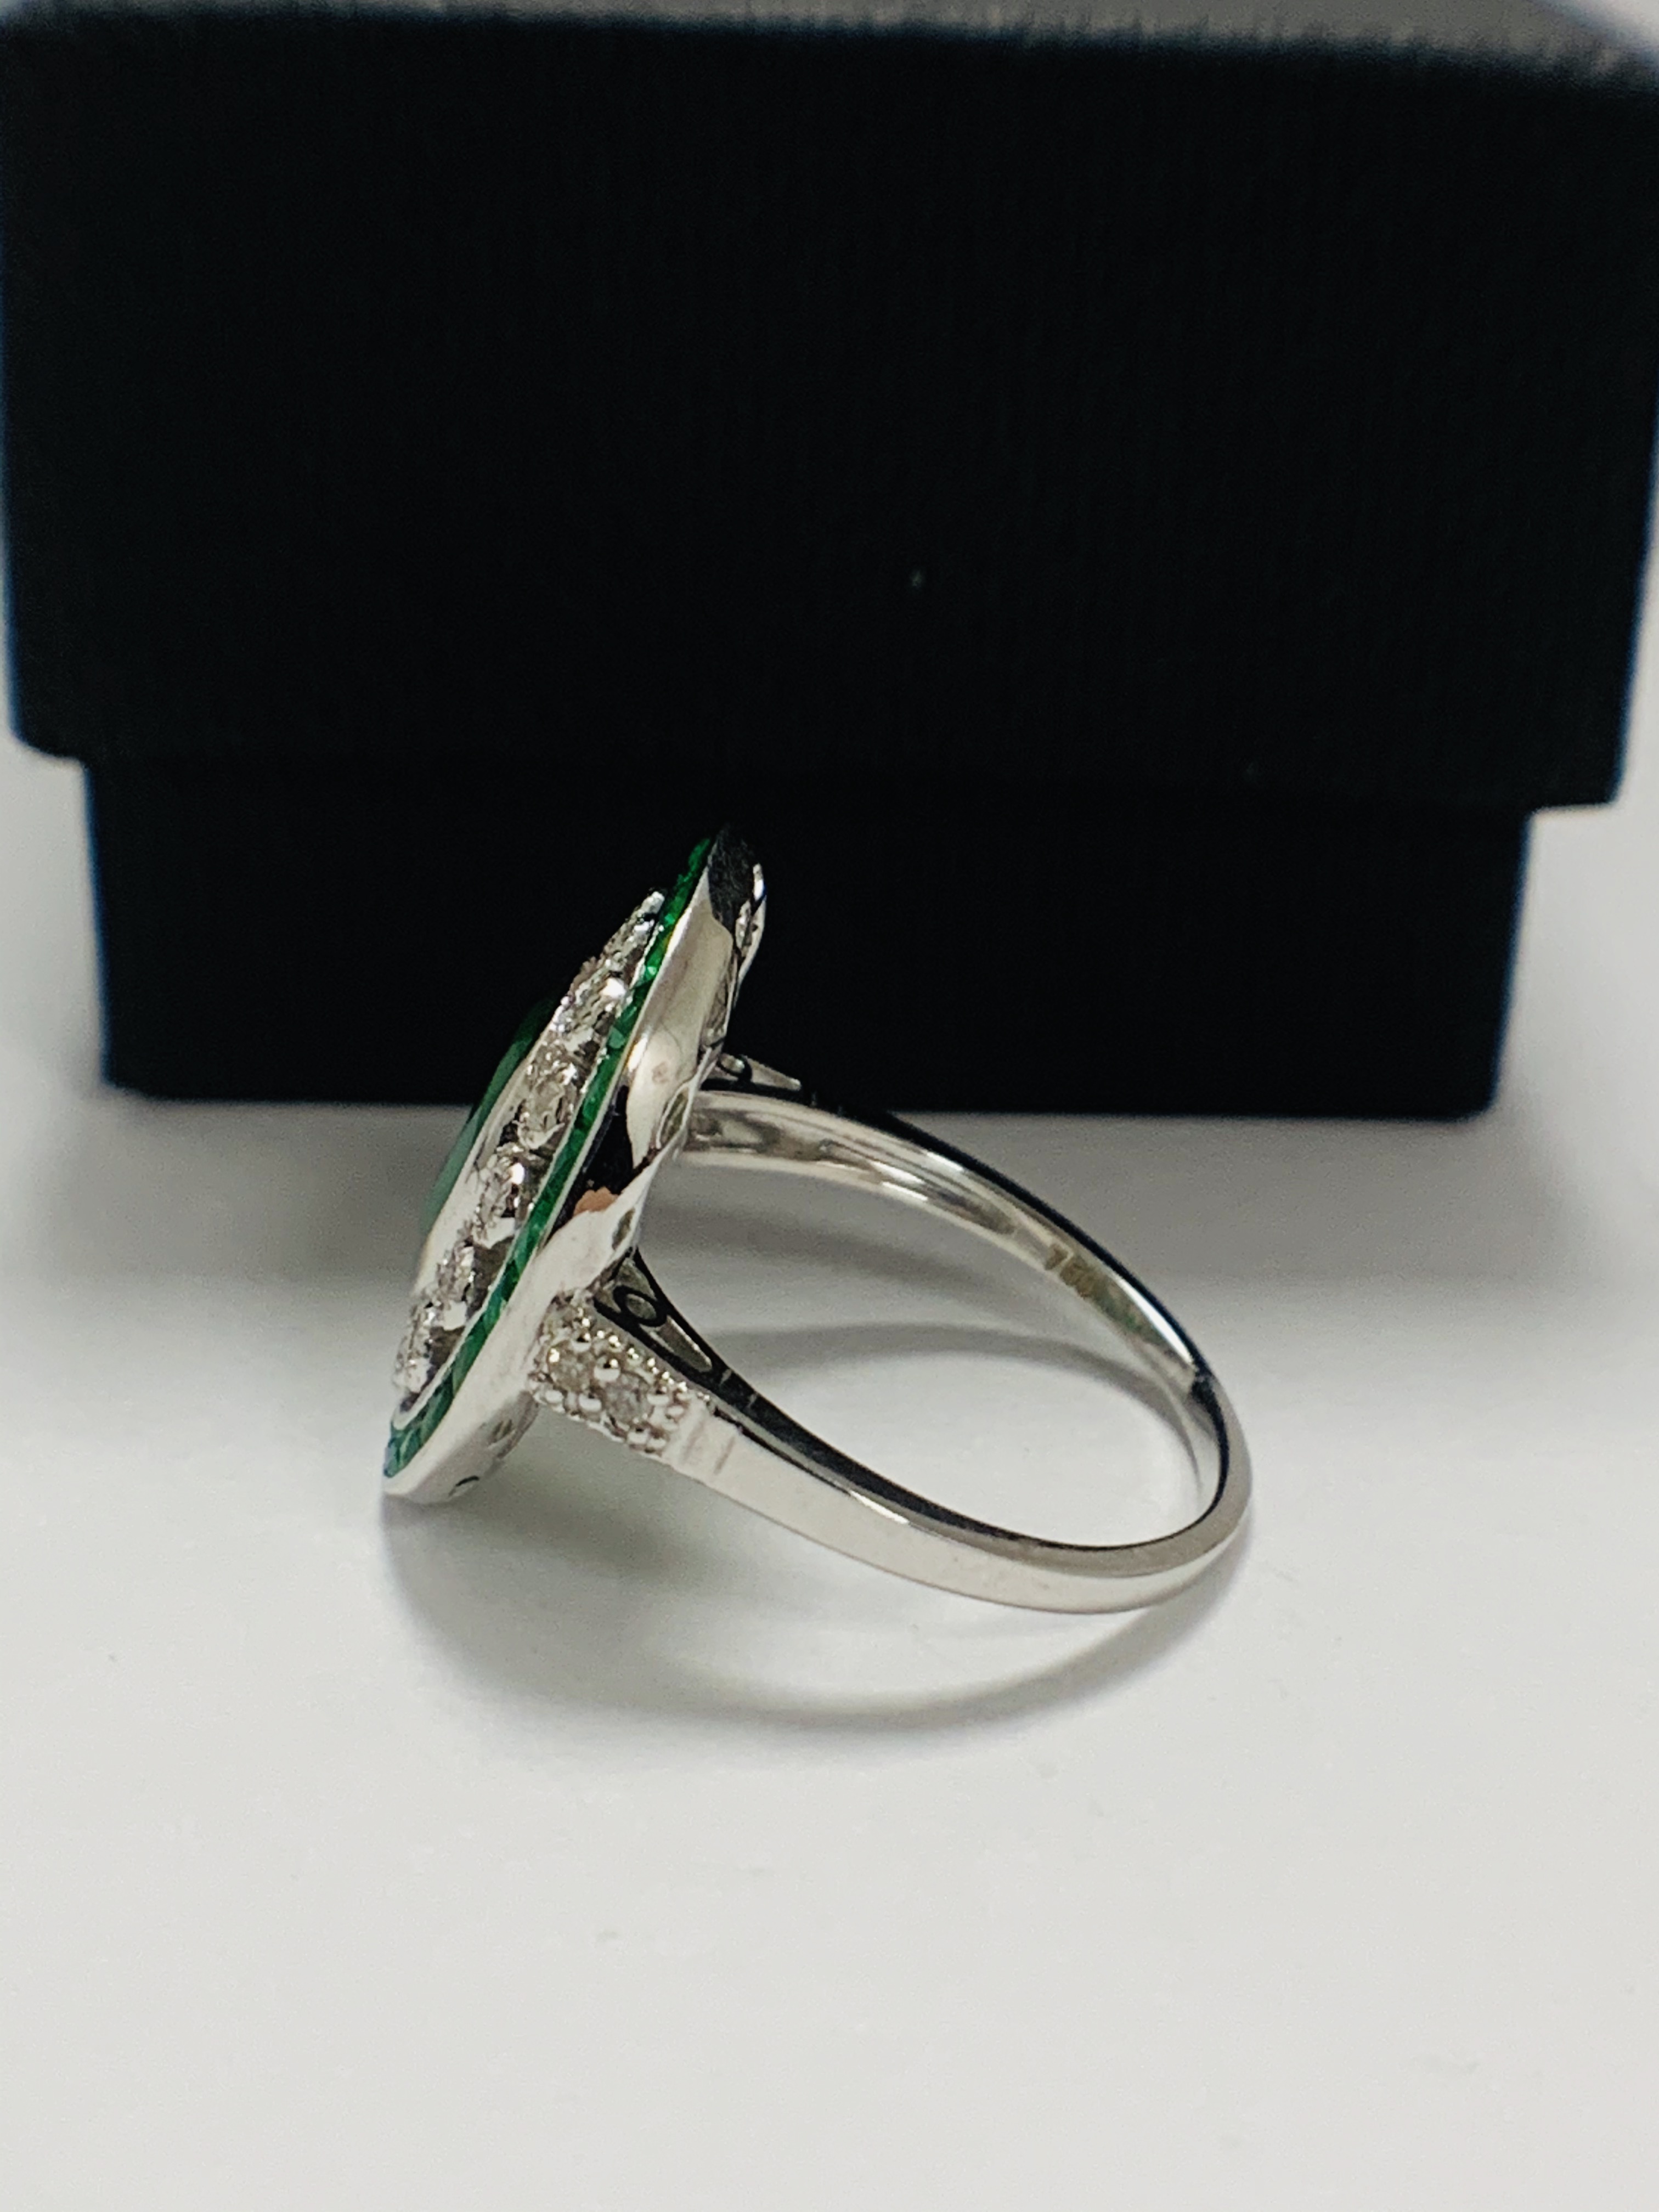 18ct White Gold Emerald and Diamond ring featuring centre, oval cut, green Emerald (2.06ct), claw se - Image 4 of 11